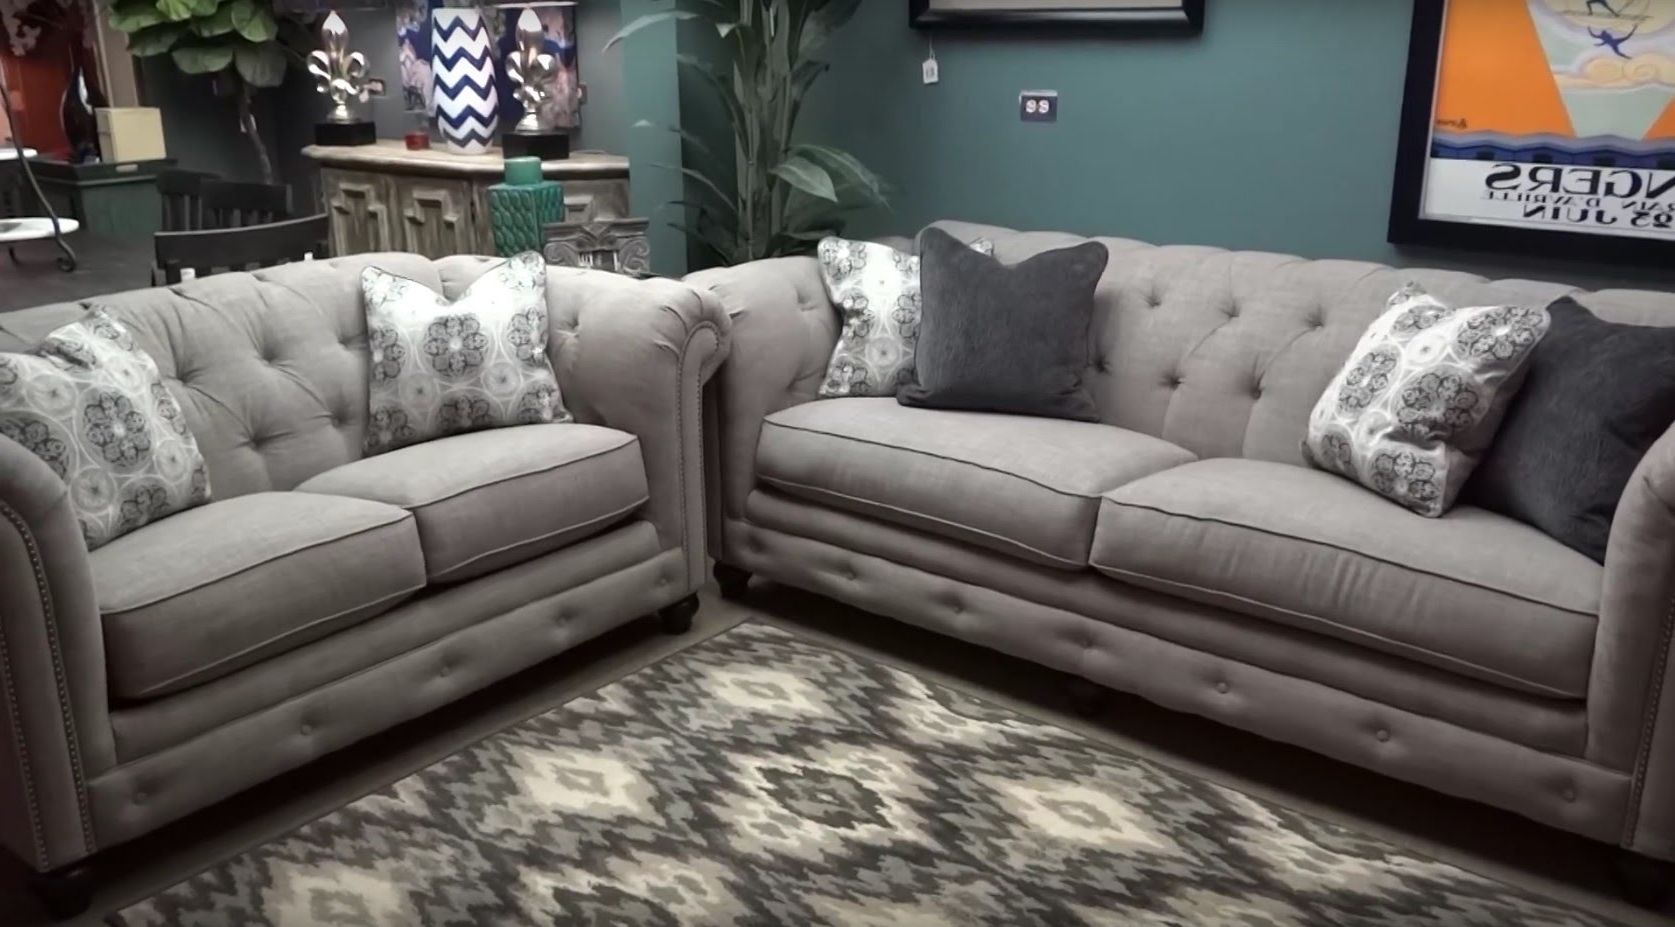 Ashley Tufted Sofas Pertaining To Well Known Ashley Furniture Azlyn Sepia Tufted Sofa & Loveseat 994 Review (View 1 of 15)